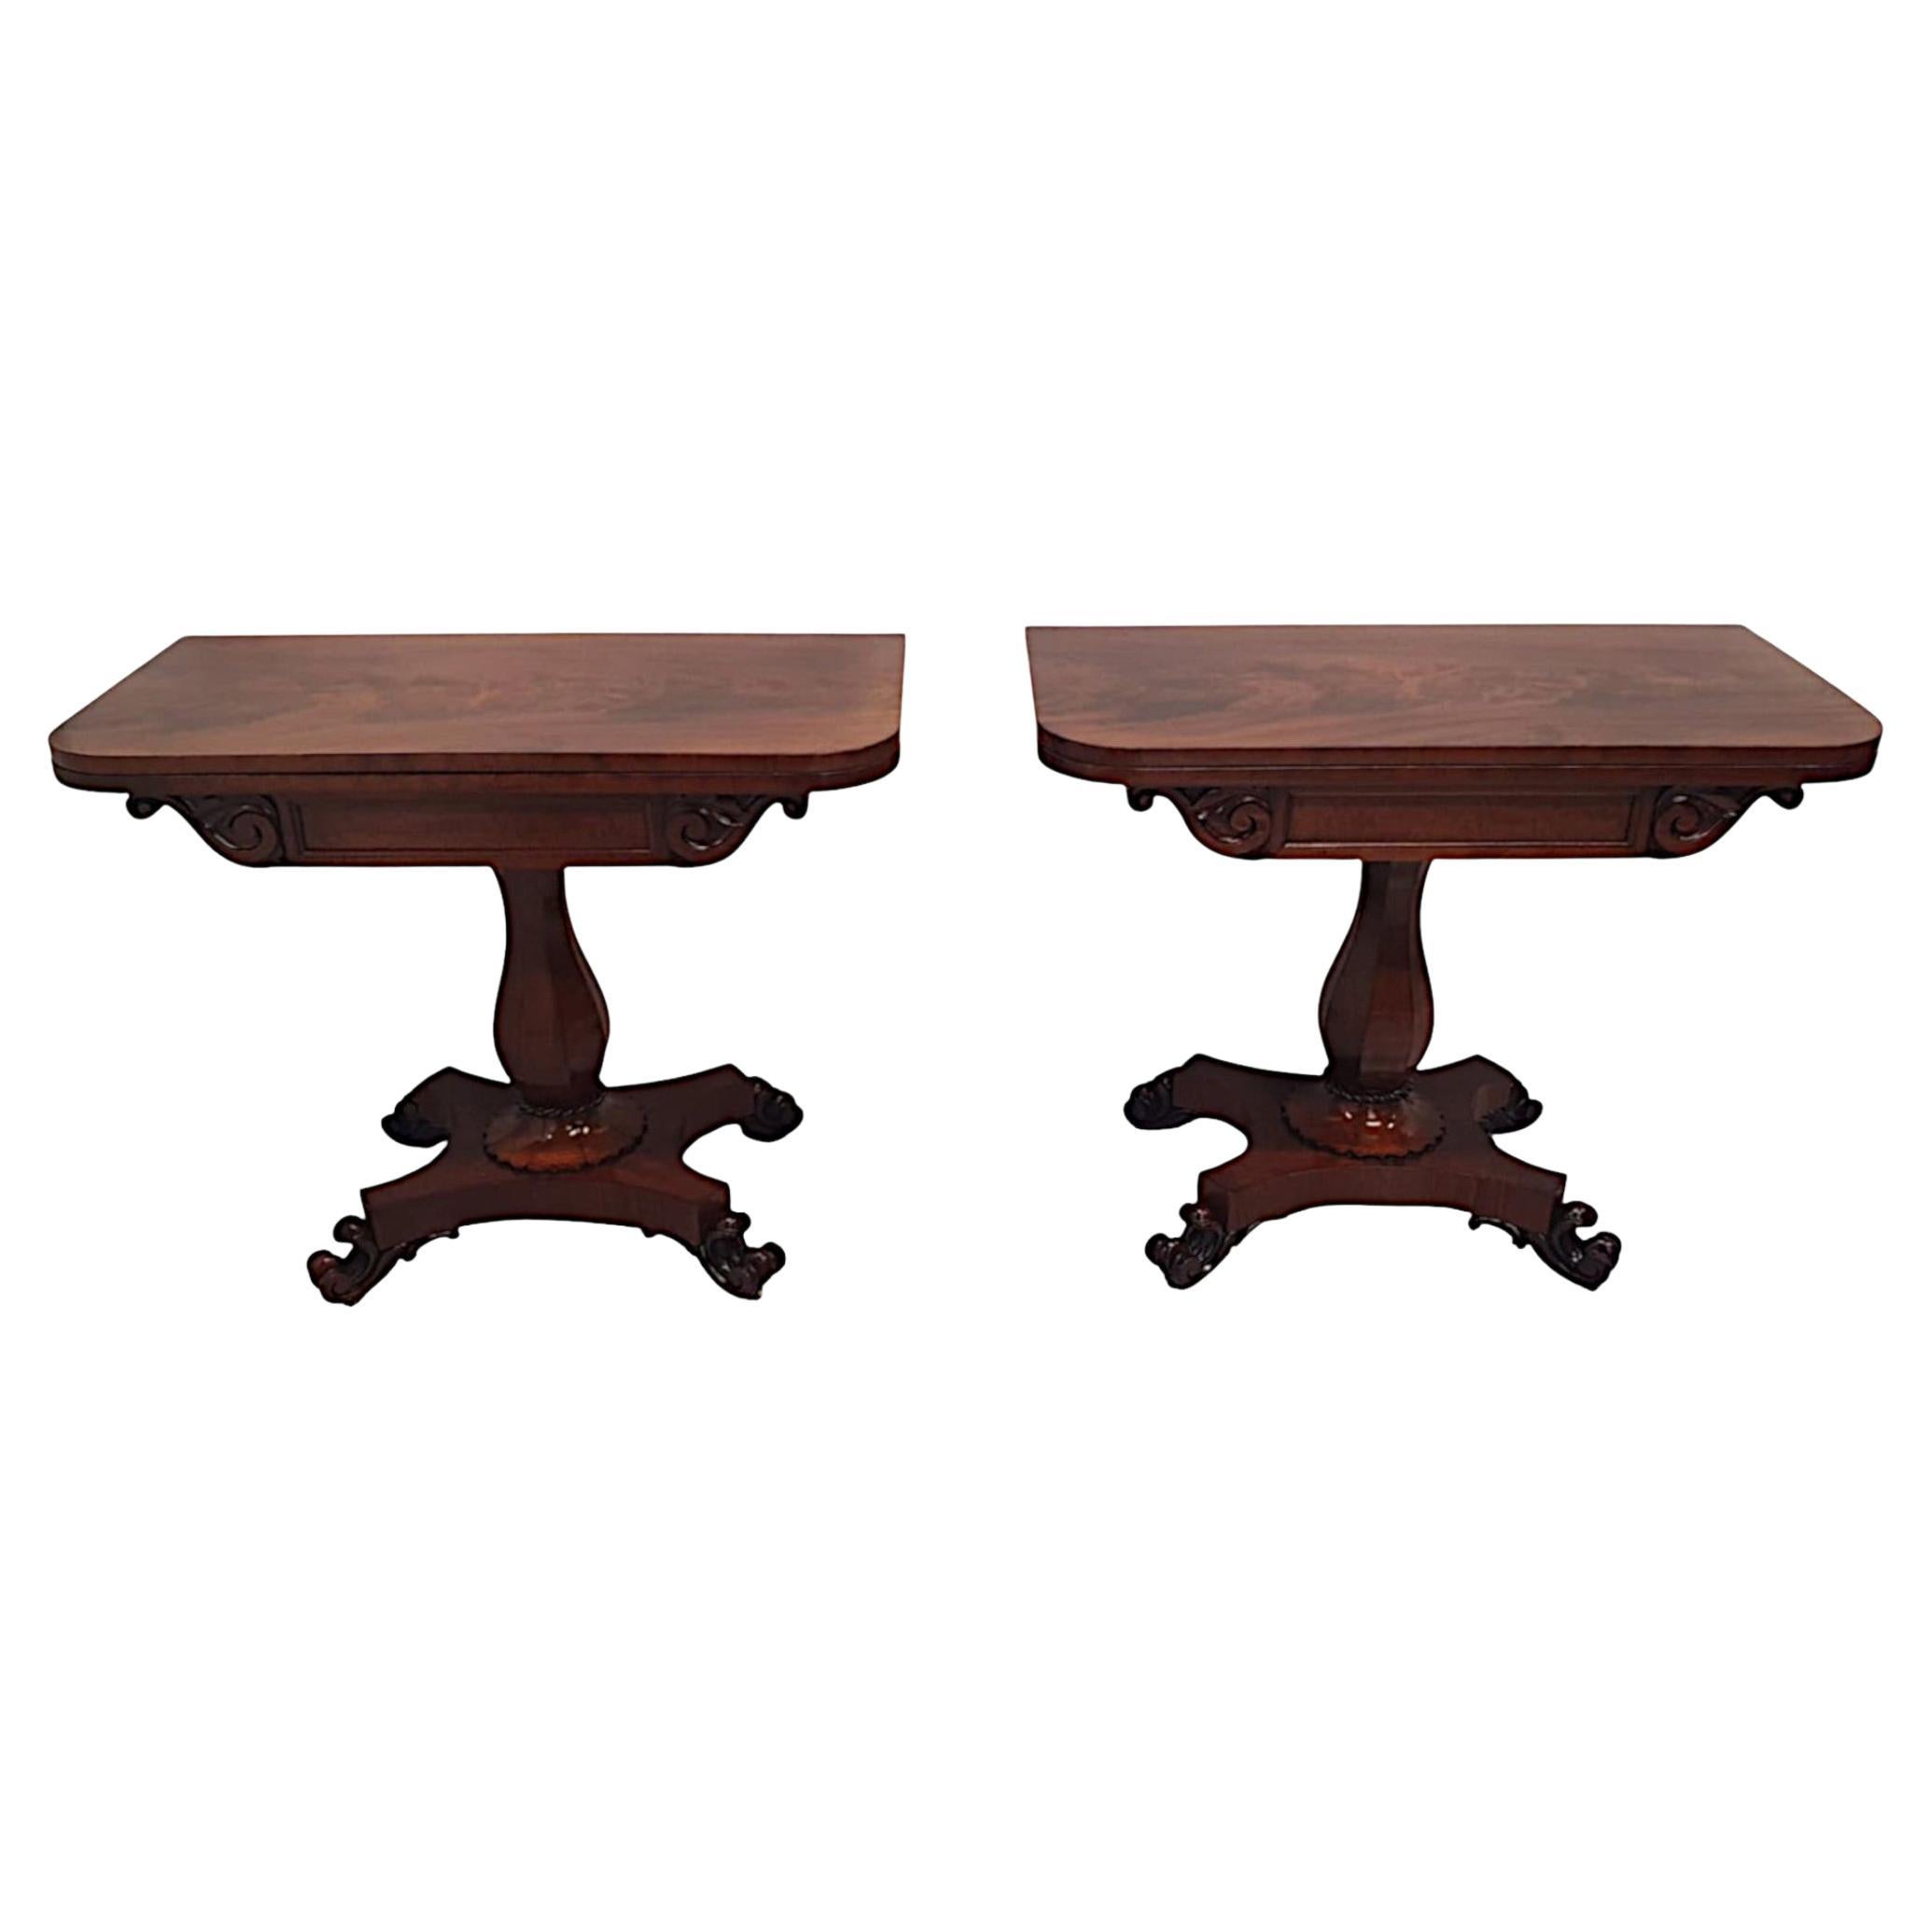 A Very Rare Pair of 19th Century William IV Card Tables  For Sale